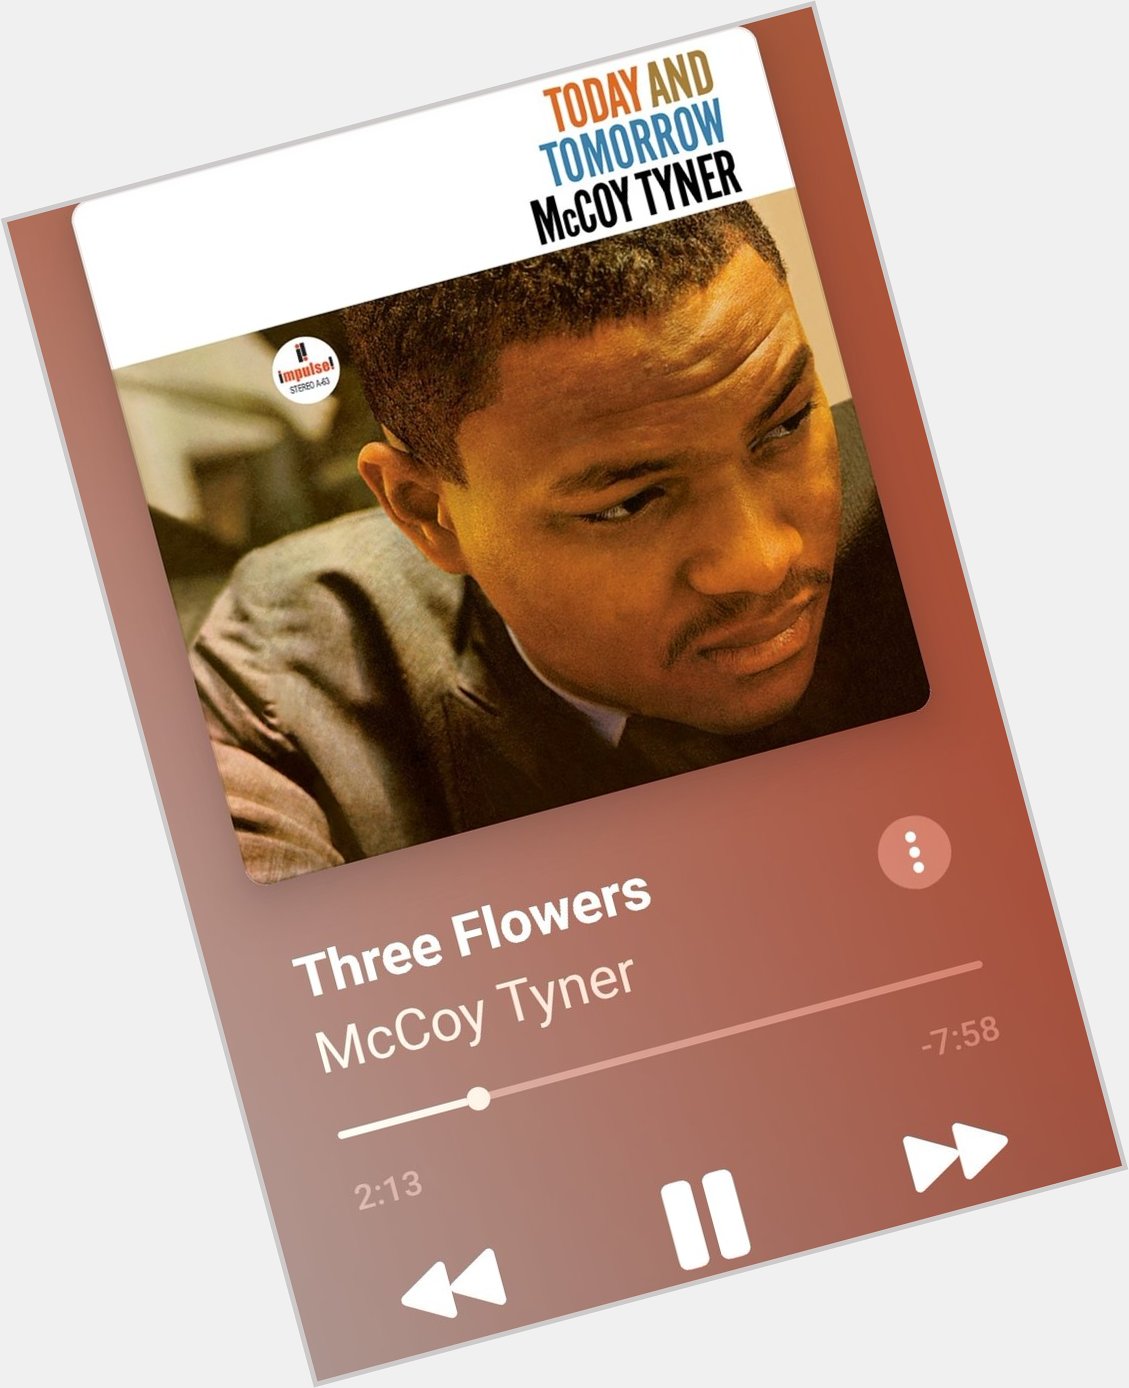 Happy birthday, McCoy Tyner! Continue to rest in peace. 